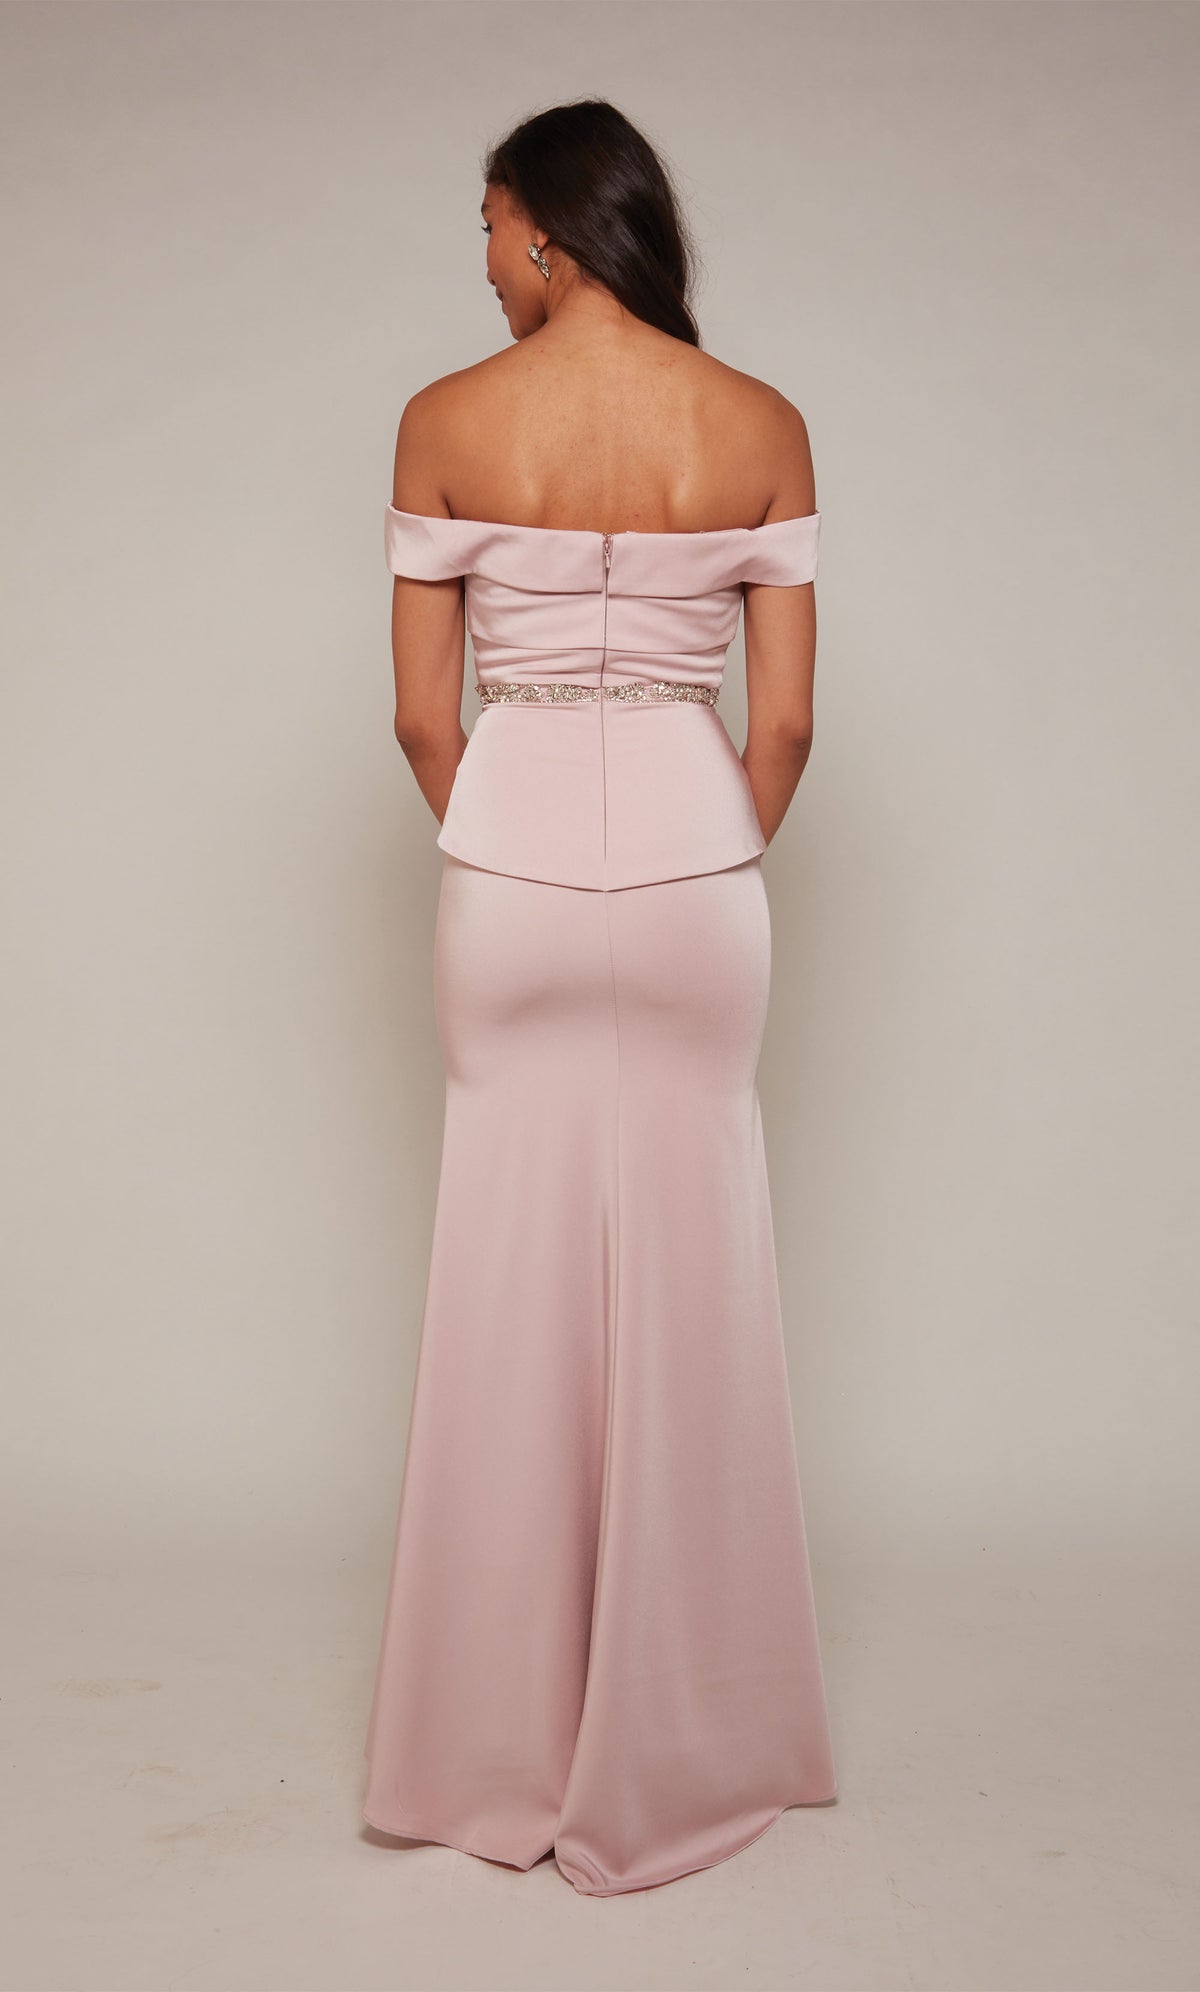 Rosewood colored, off the shoulder designer gown with an closed zipper back, beaded waist, and slight train.